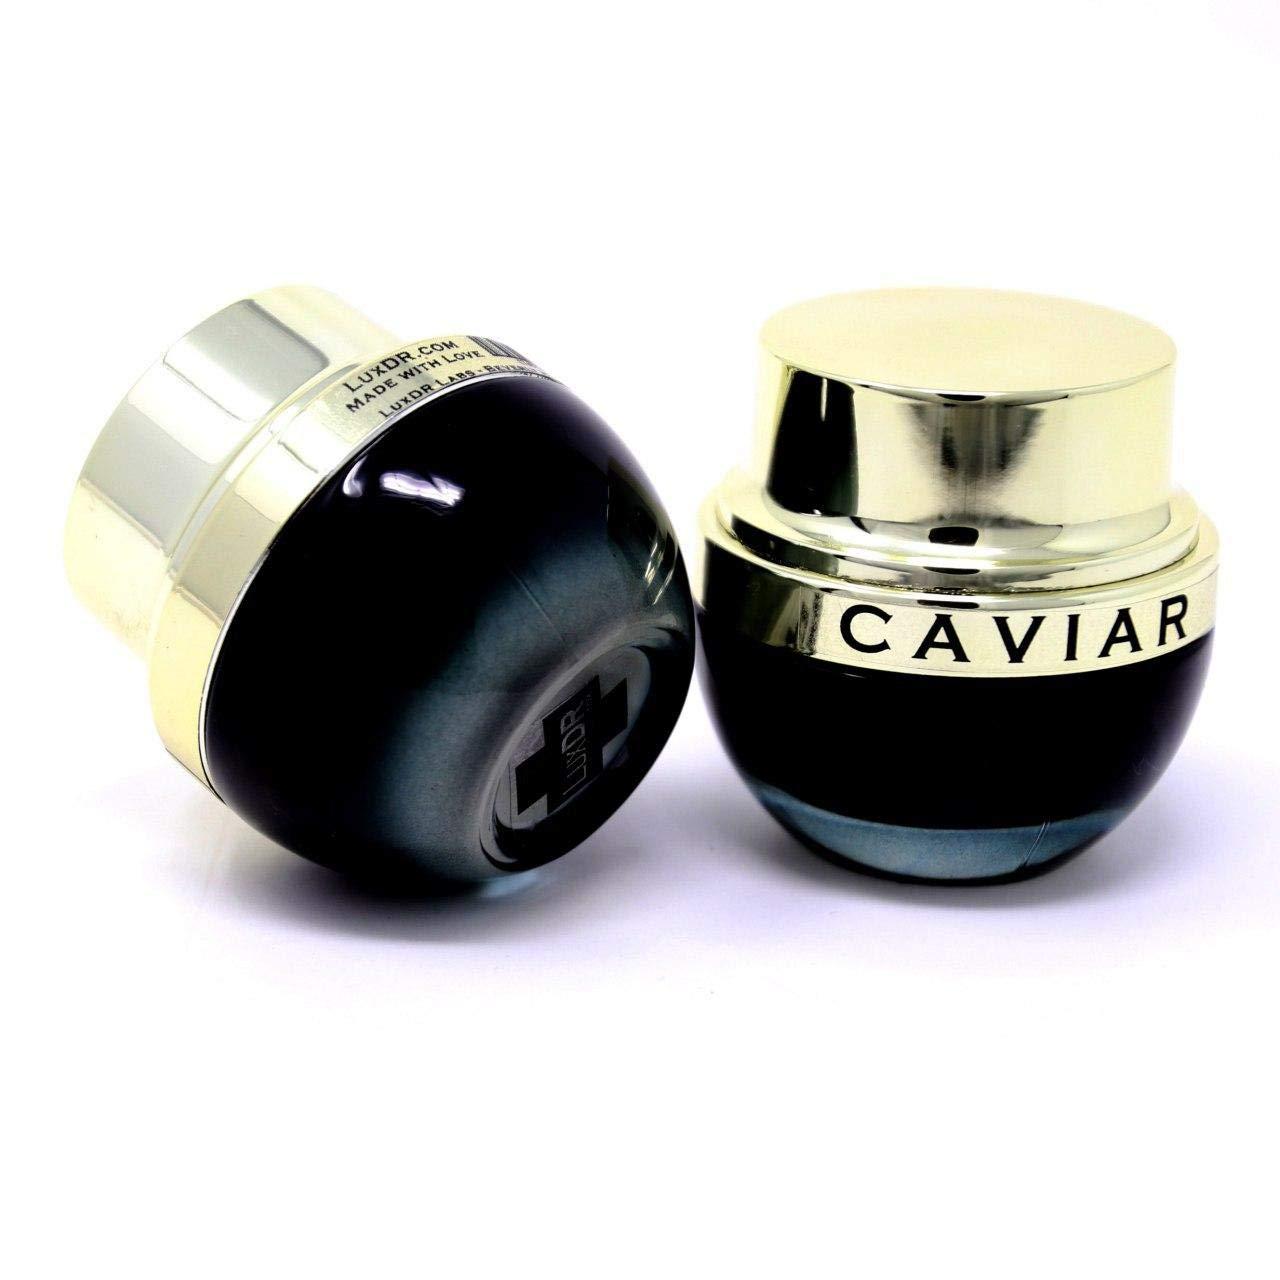  Caviar Natural Leather Conditioner Restorer Cream for Designer  Handbags, Purses, Shoes, Luggage, Bags, and Luxury Goods, Deep Conditioning  Repair, Made in the USA, 30 mL : Clothing, Shoes & Jewelry